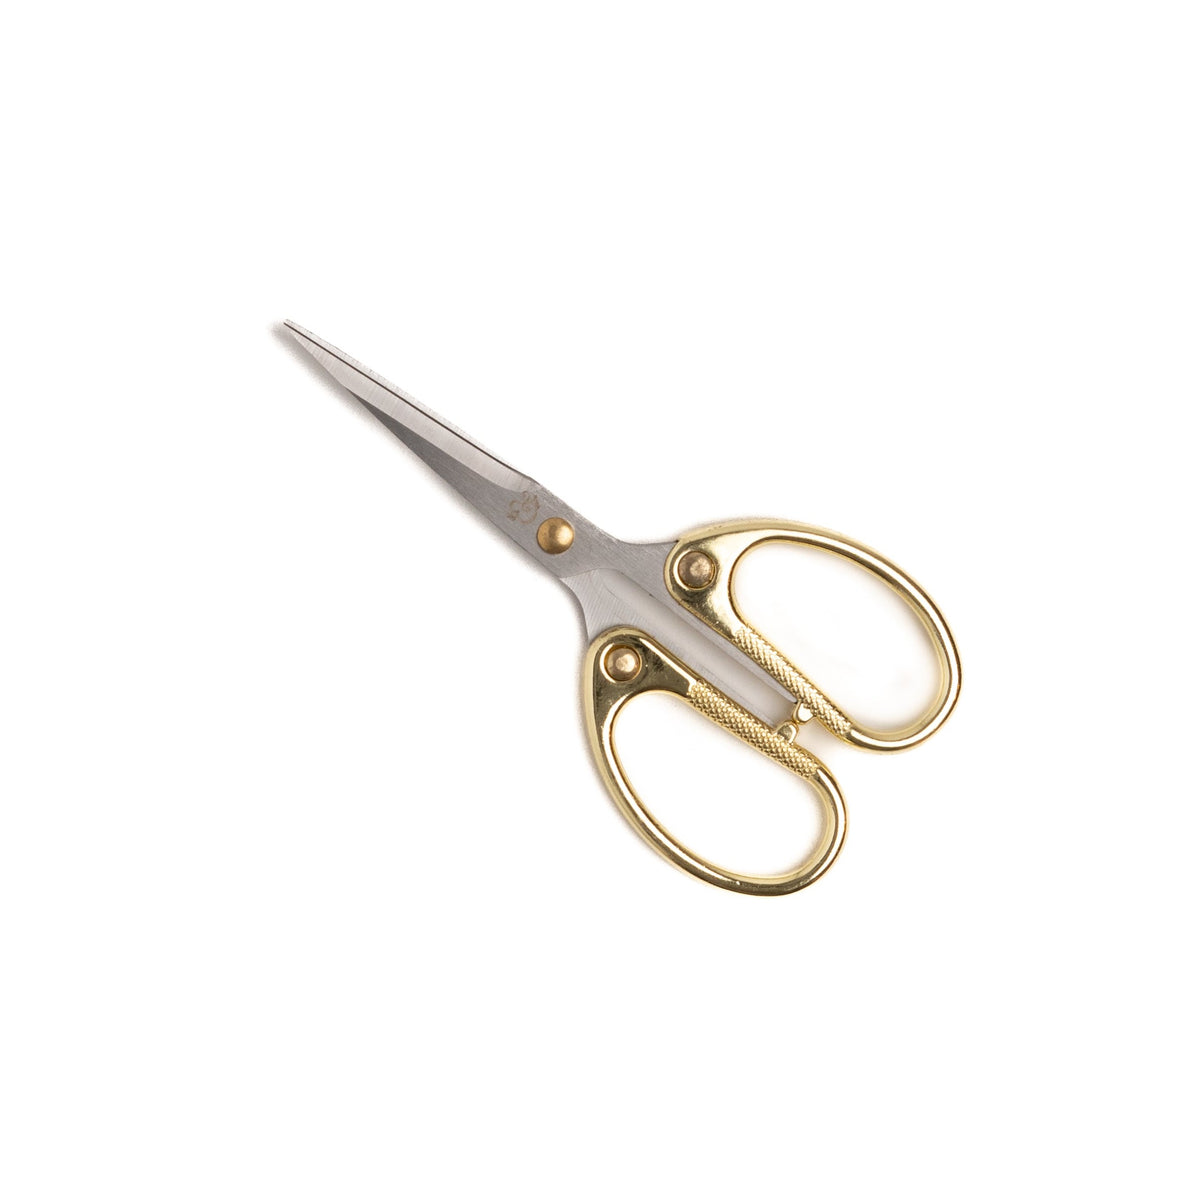 Dropship Powerful Scissors, Alloy Stainless Steel Gold Scissors, Wedding  Kitchen Golden-plated Scissors to Sell Online at a Lower Price